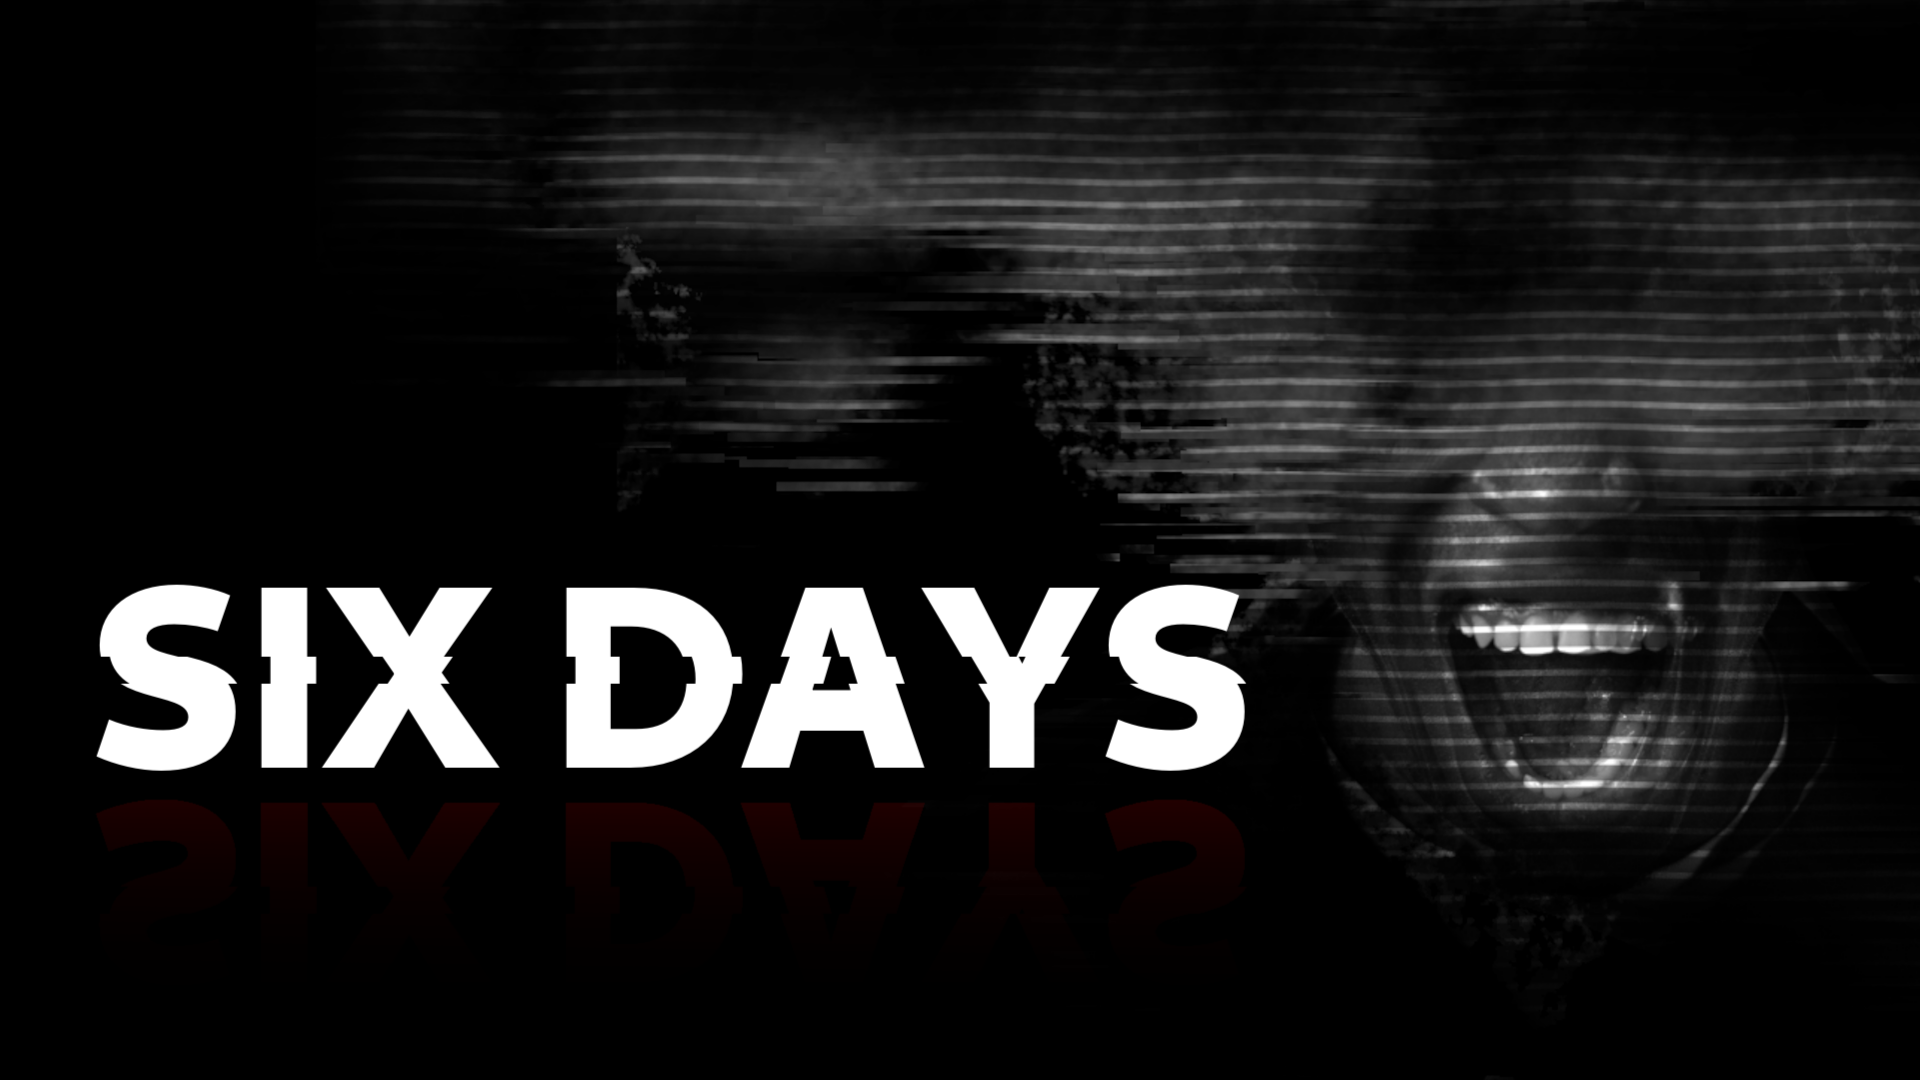 Announcing the Steam Page for “Six Days” – The Most Difficult Game of the Year!